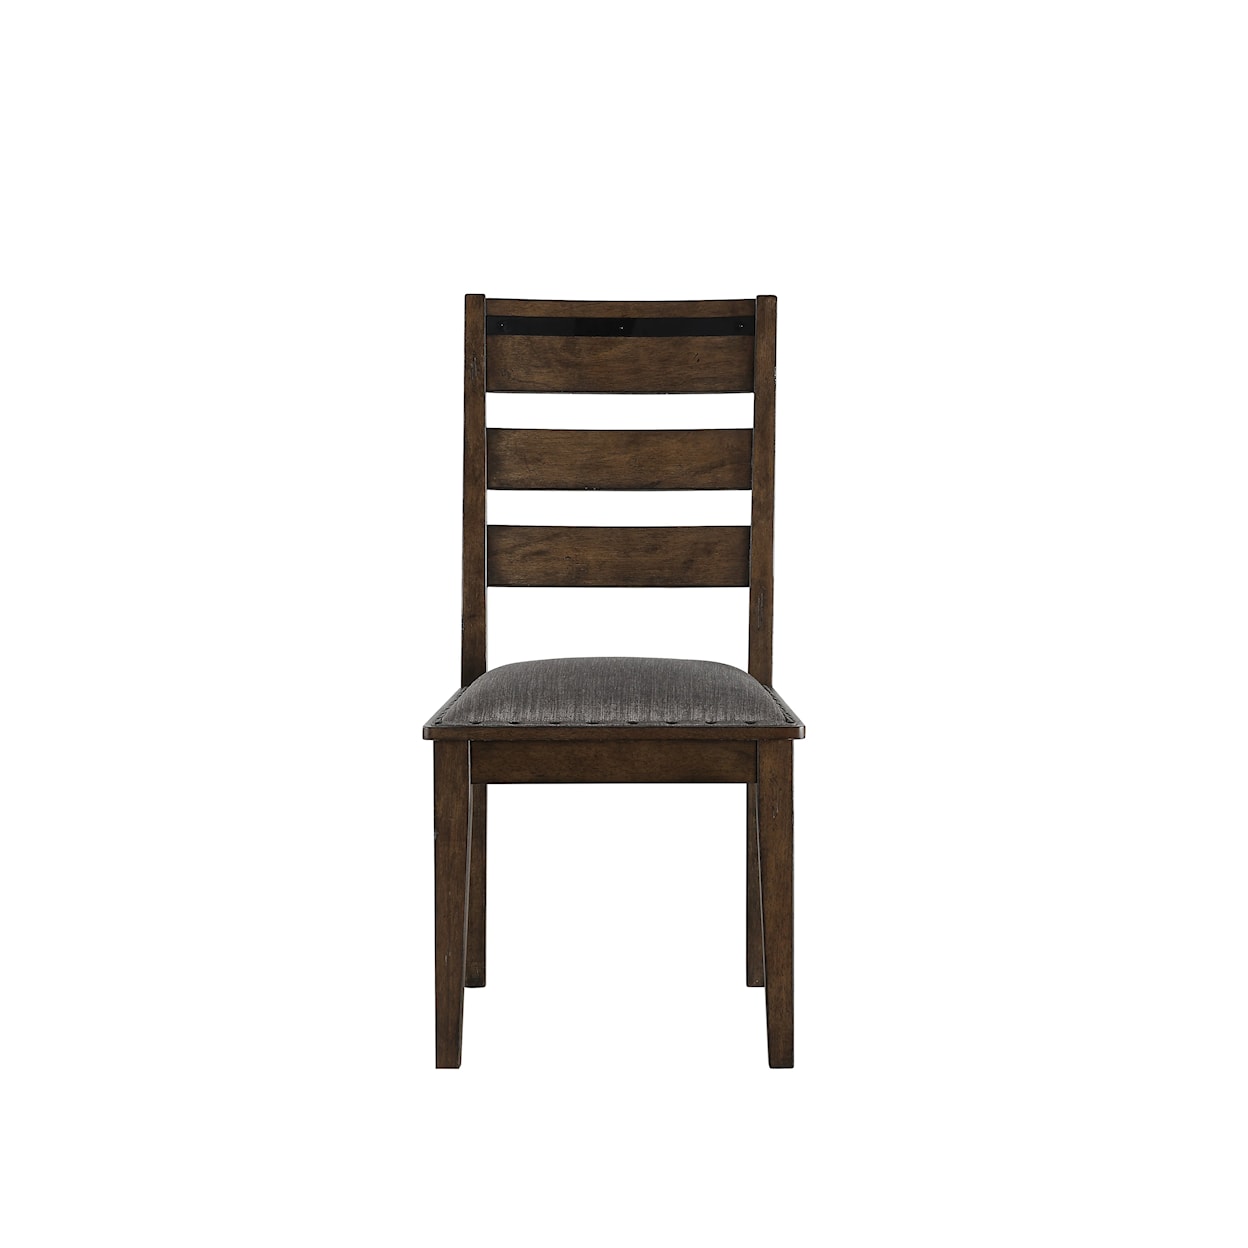 Holland House 1142 Dining Chair